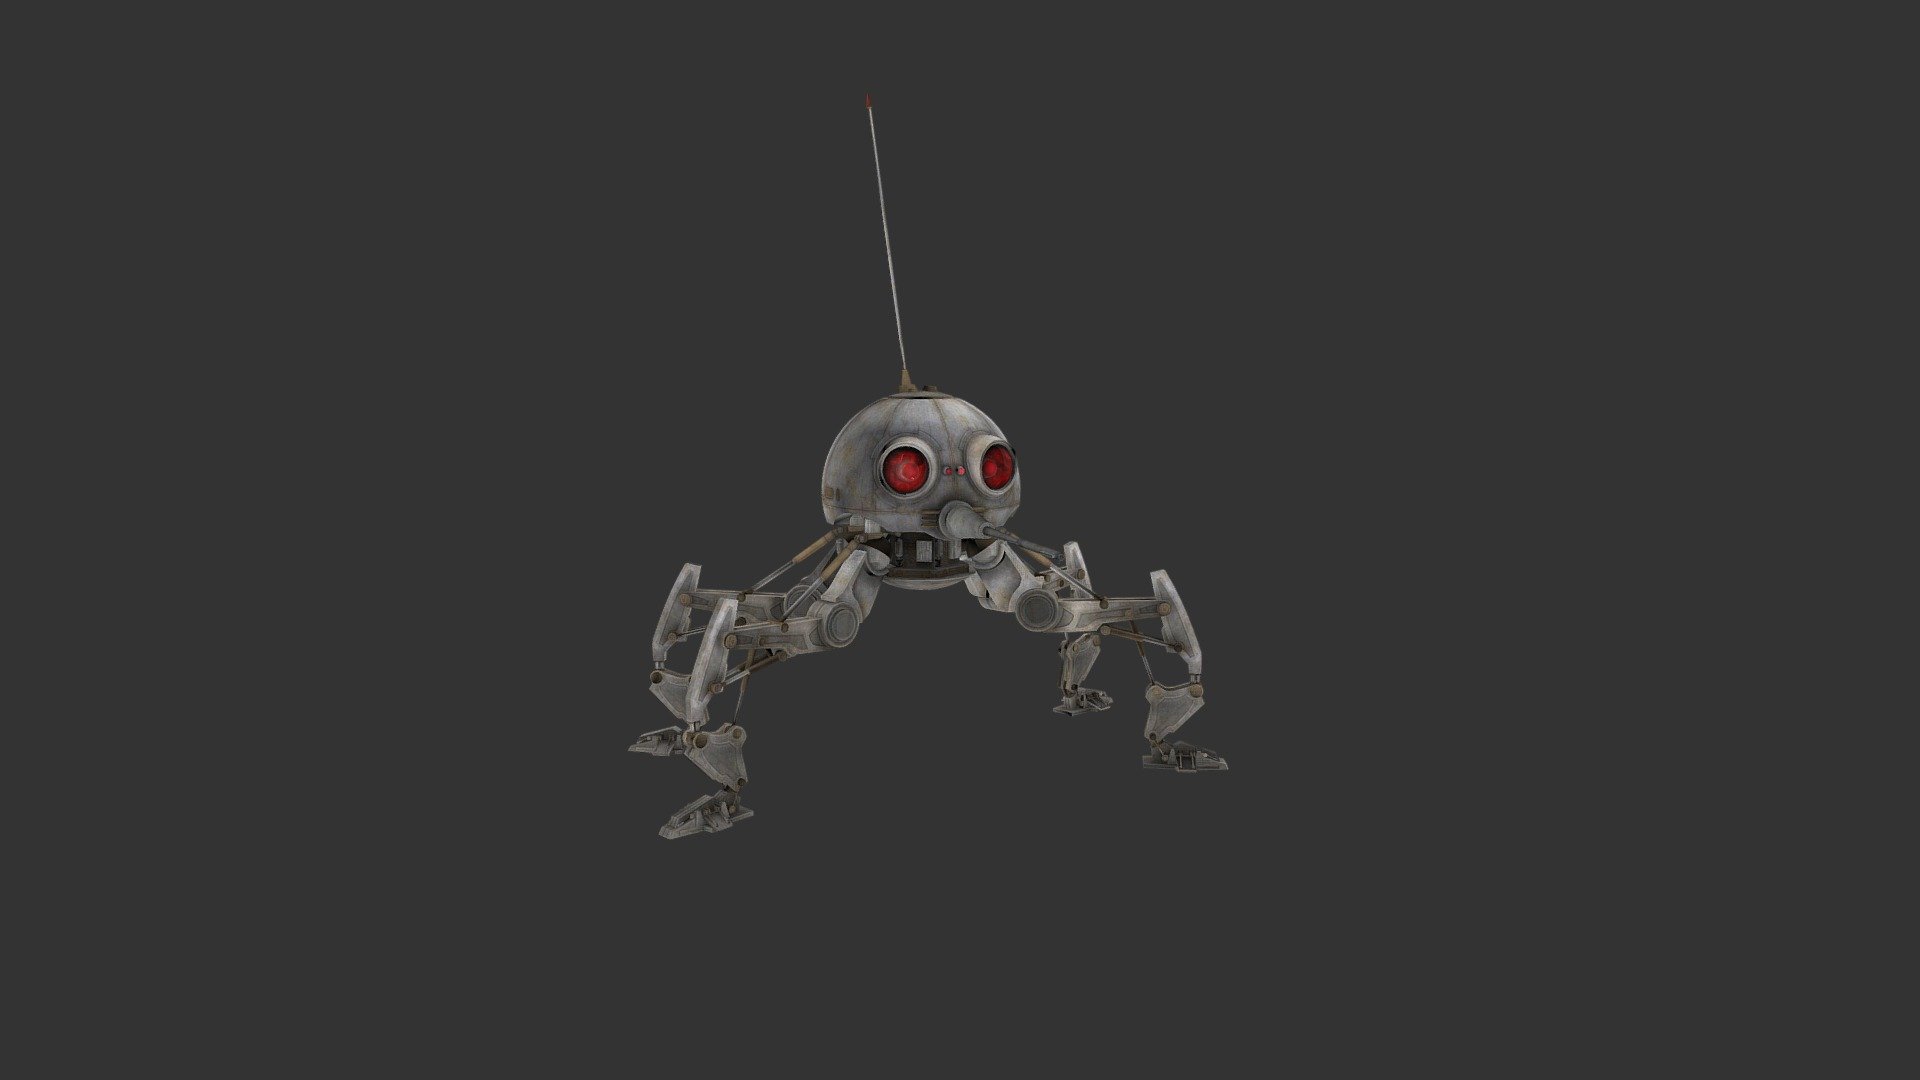 The Dwarf Spider Droid was a four-legged dome-shaped mechanical arachnid droid that featured a powerful, centrally mounted laser cannon.

This Dwarf Spider Droid is just one of the many Star Wars exhibits that can be seen in the Star Wars Virtual Museum.

Download the Star Wars Virtual Museum here:

http://www.starwarsvirtualmuseum.com - Dwarf Spider Droid - Download Free 3D model by Mind Mulch for The Masses (@mindmulchforthemasses) 3d model